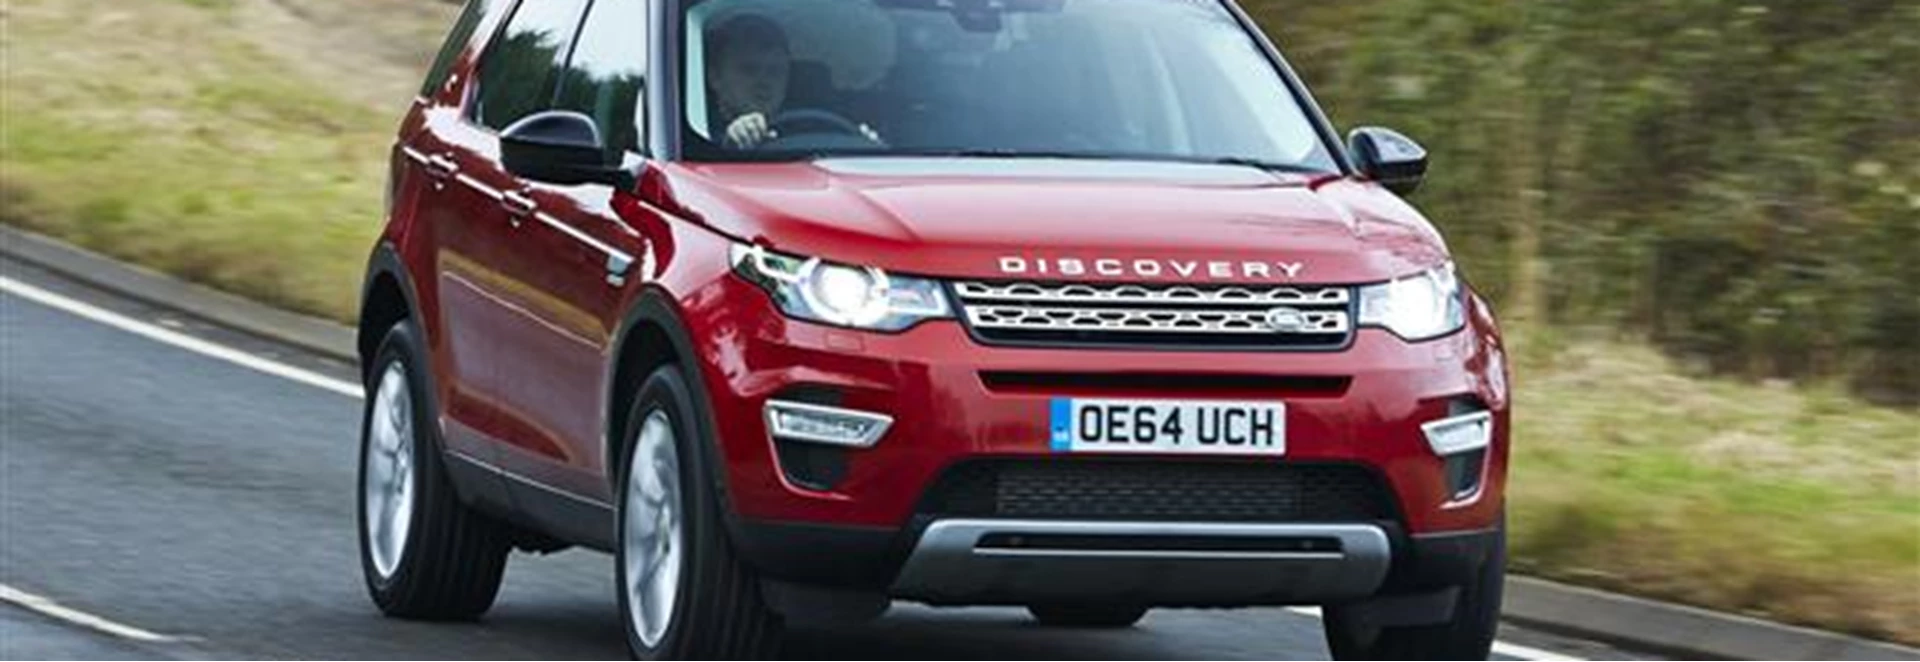 Land Rover Discovery Sport 2.2 SD4 SE Tech launch report